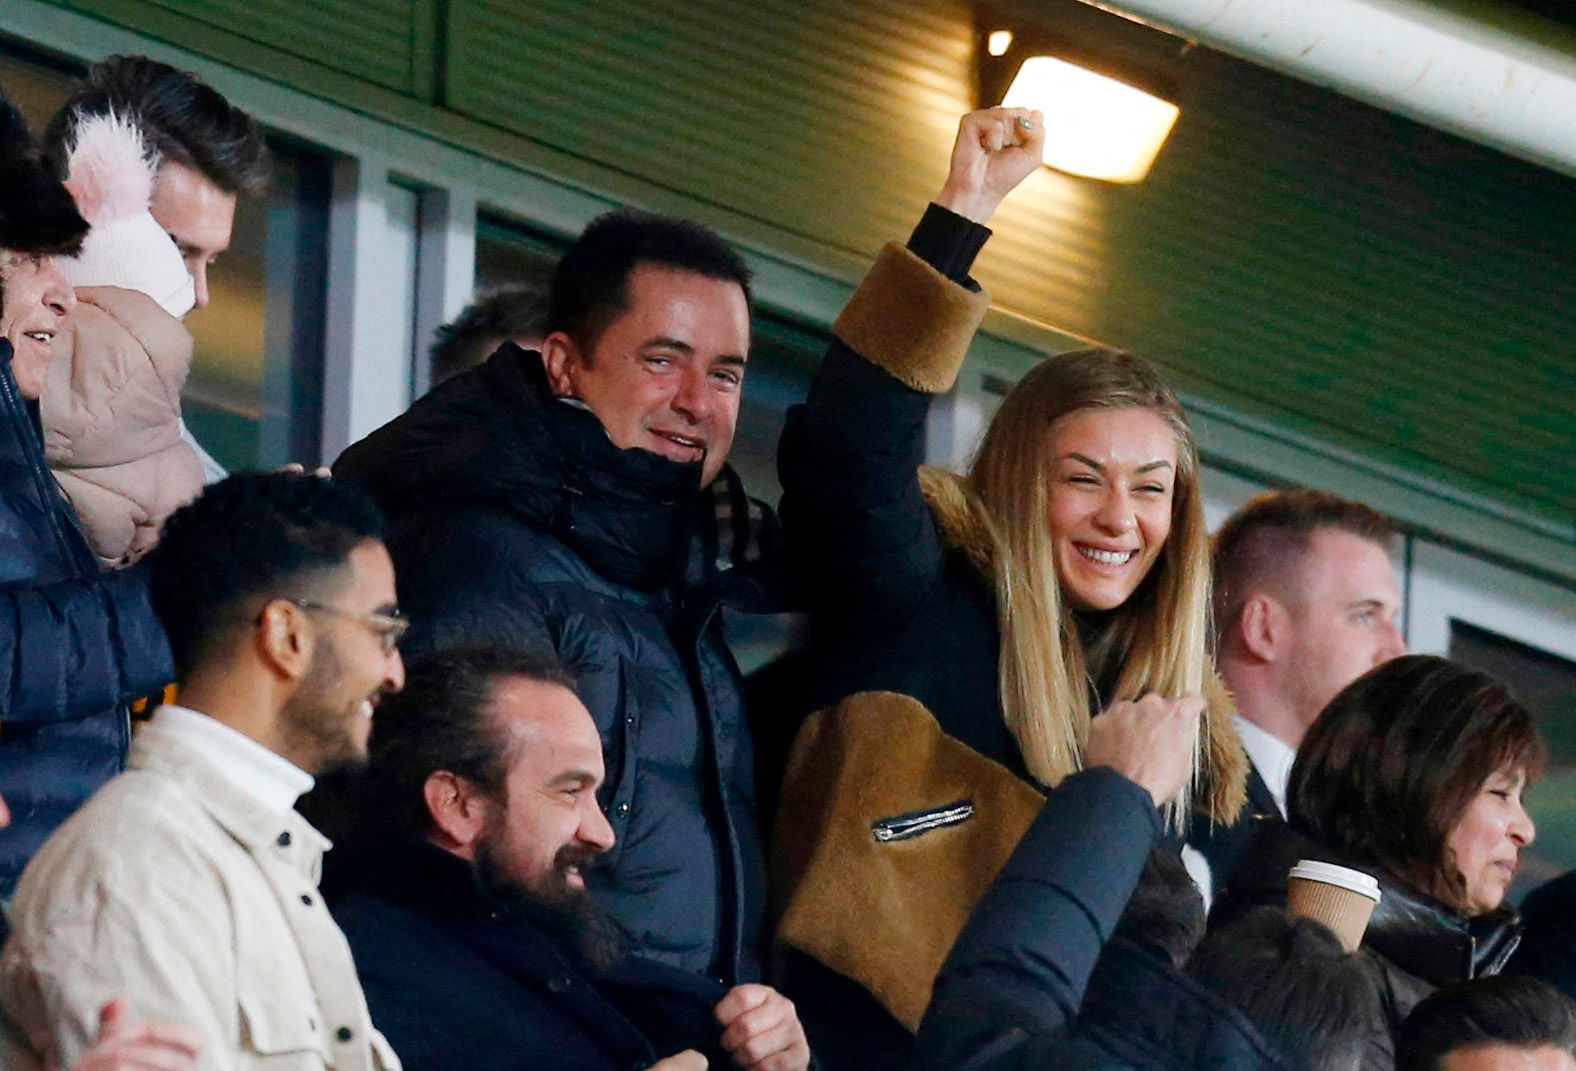 Soccer Football - FA Cup Third Round - Hull City v Everton - KCOM Stadium, Hull, Britain - January 8, 2022 Businessman Acun Ilıcalı celebrates their first goal scored by Hull City's Tyler Smith Action Images via Reuters/Ed Sykes